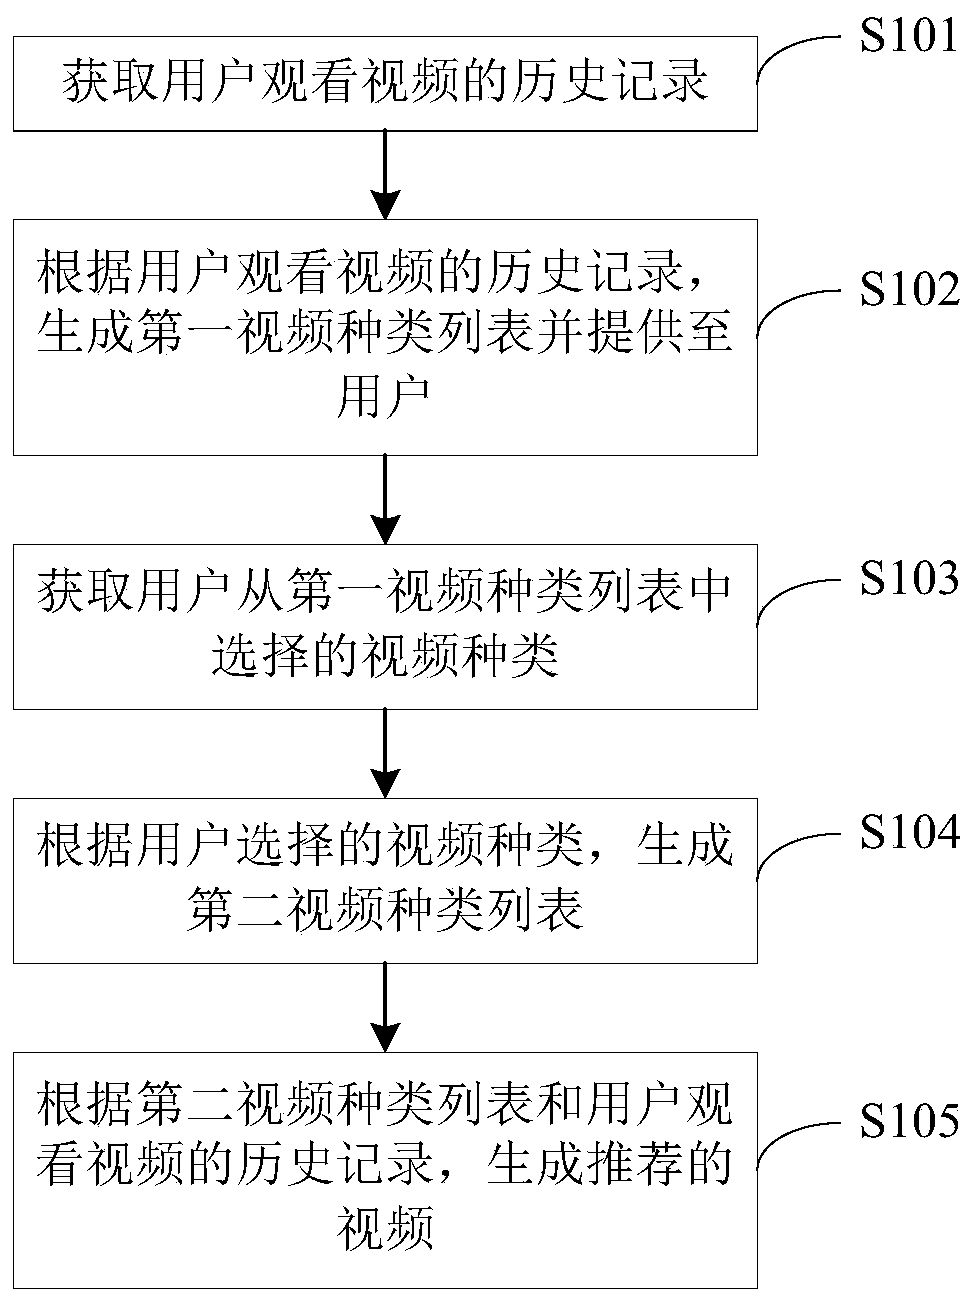 Video recommendation method and system, computer program product and readable storage medium